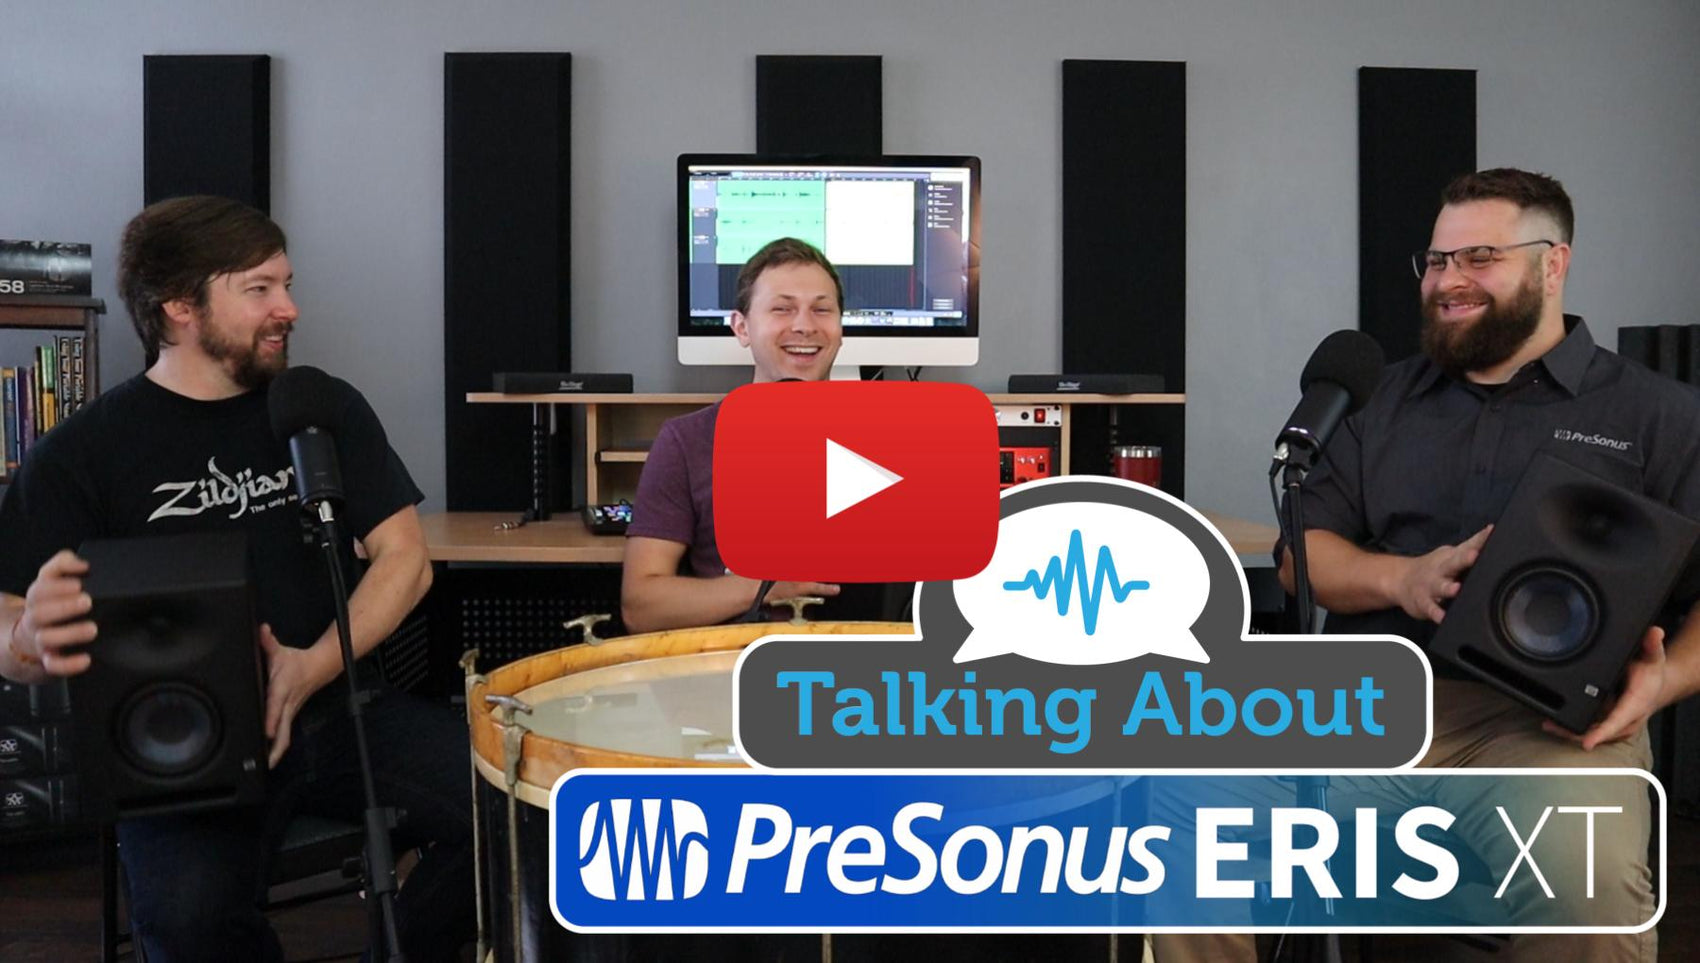 Weekly Show - PPA Unfiltered - What's New in the PreSonus ERIS XT Monitors?